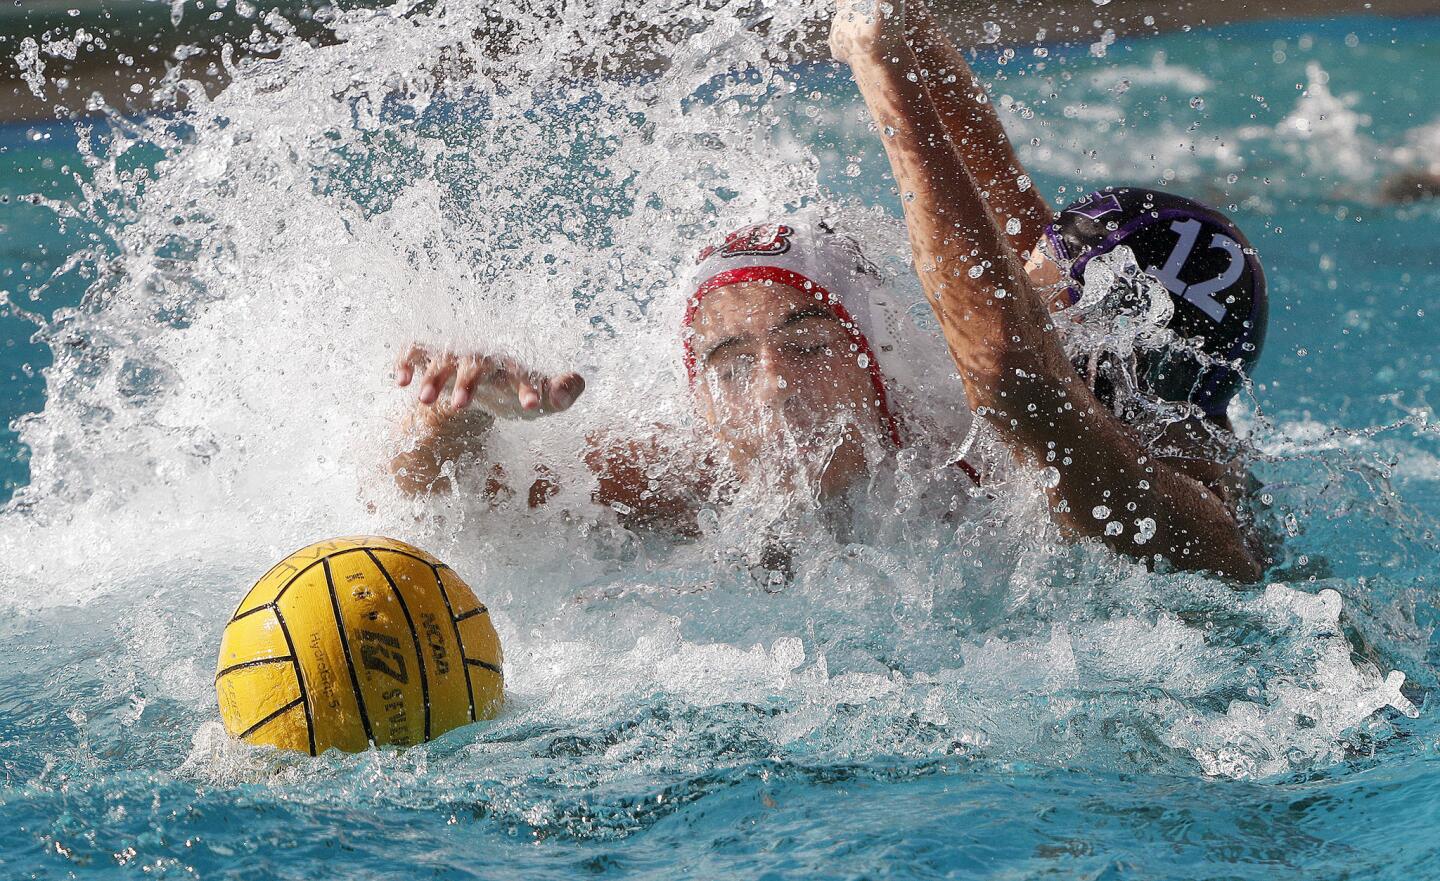 Photo Gallery: Hoover vs. Burroughs in Pacific League boys' water polo